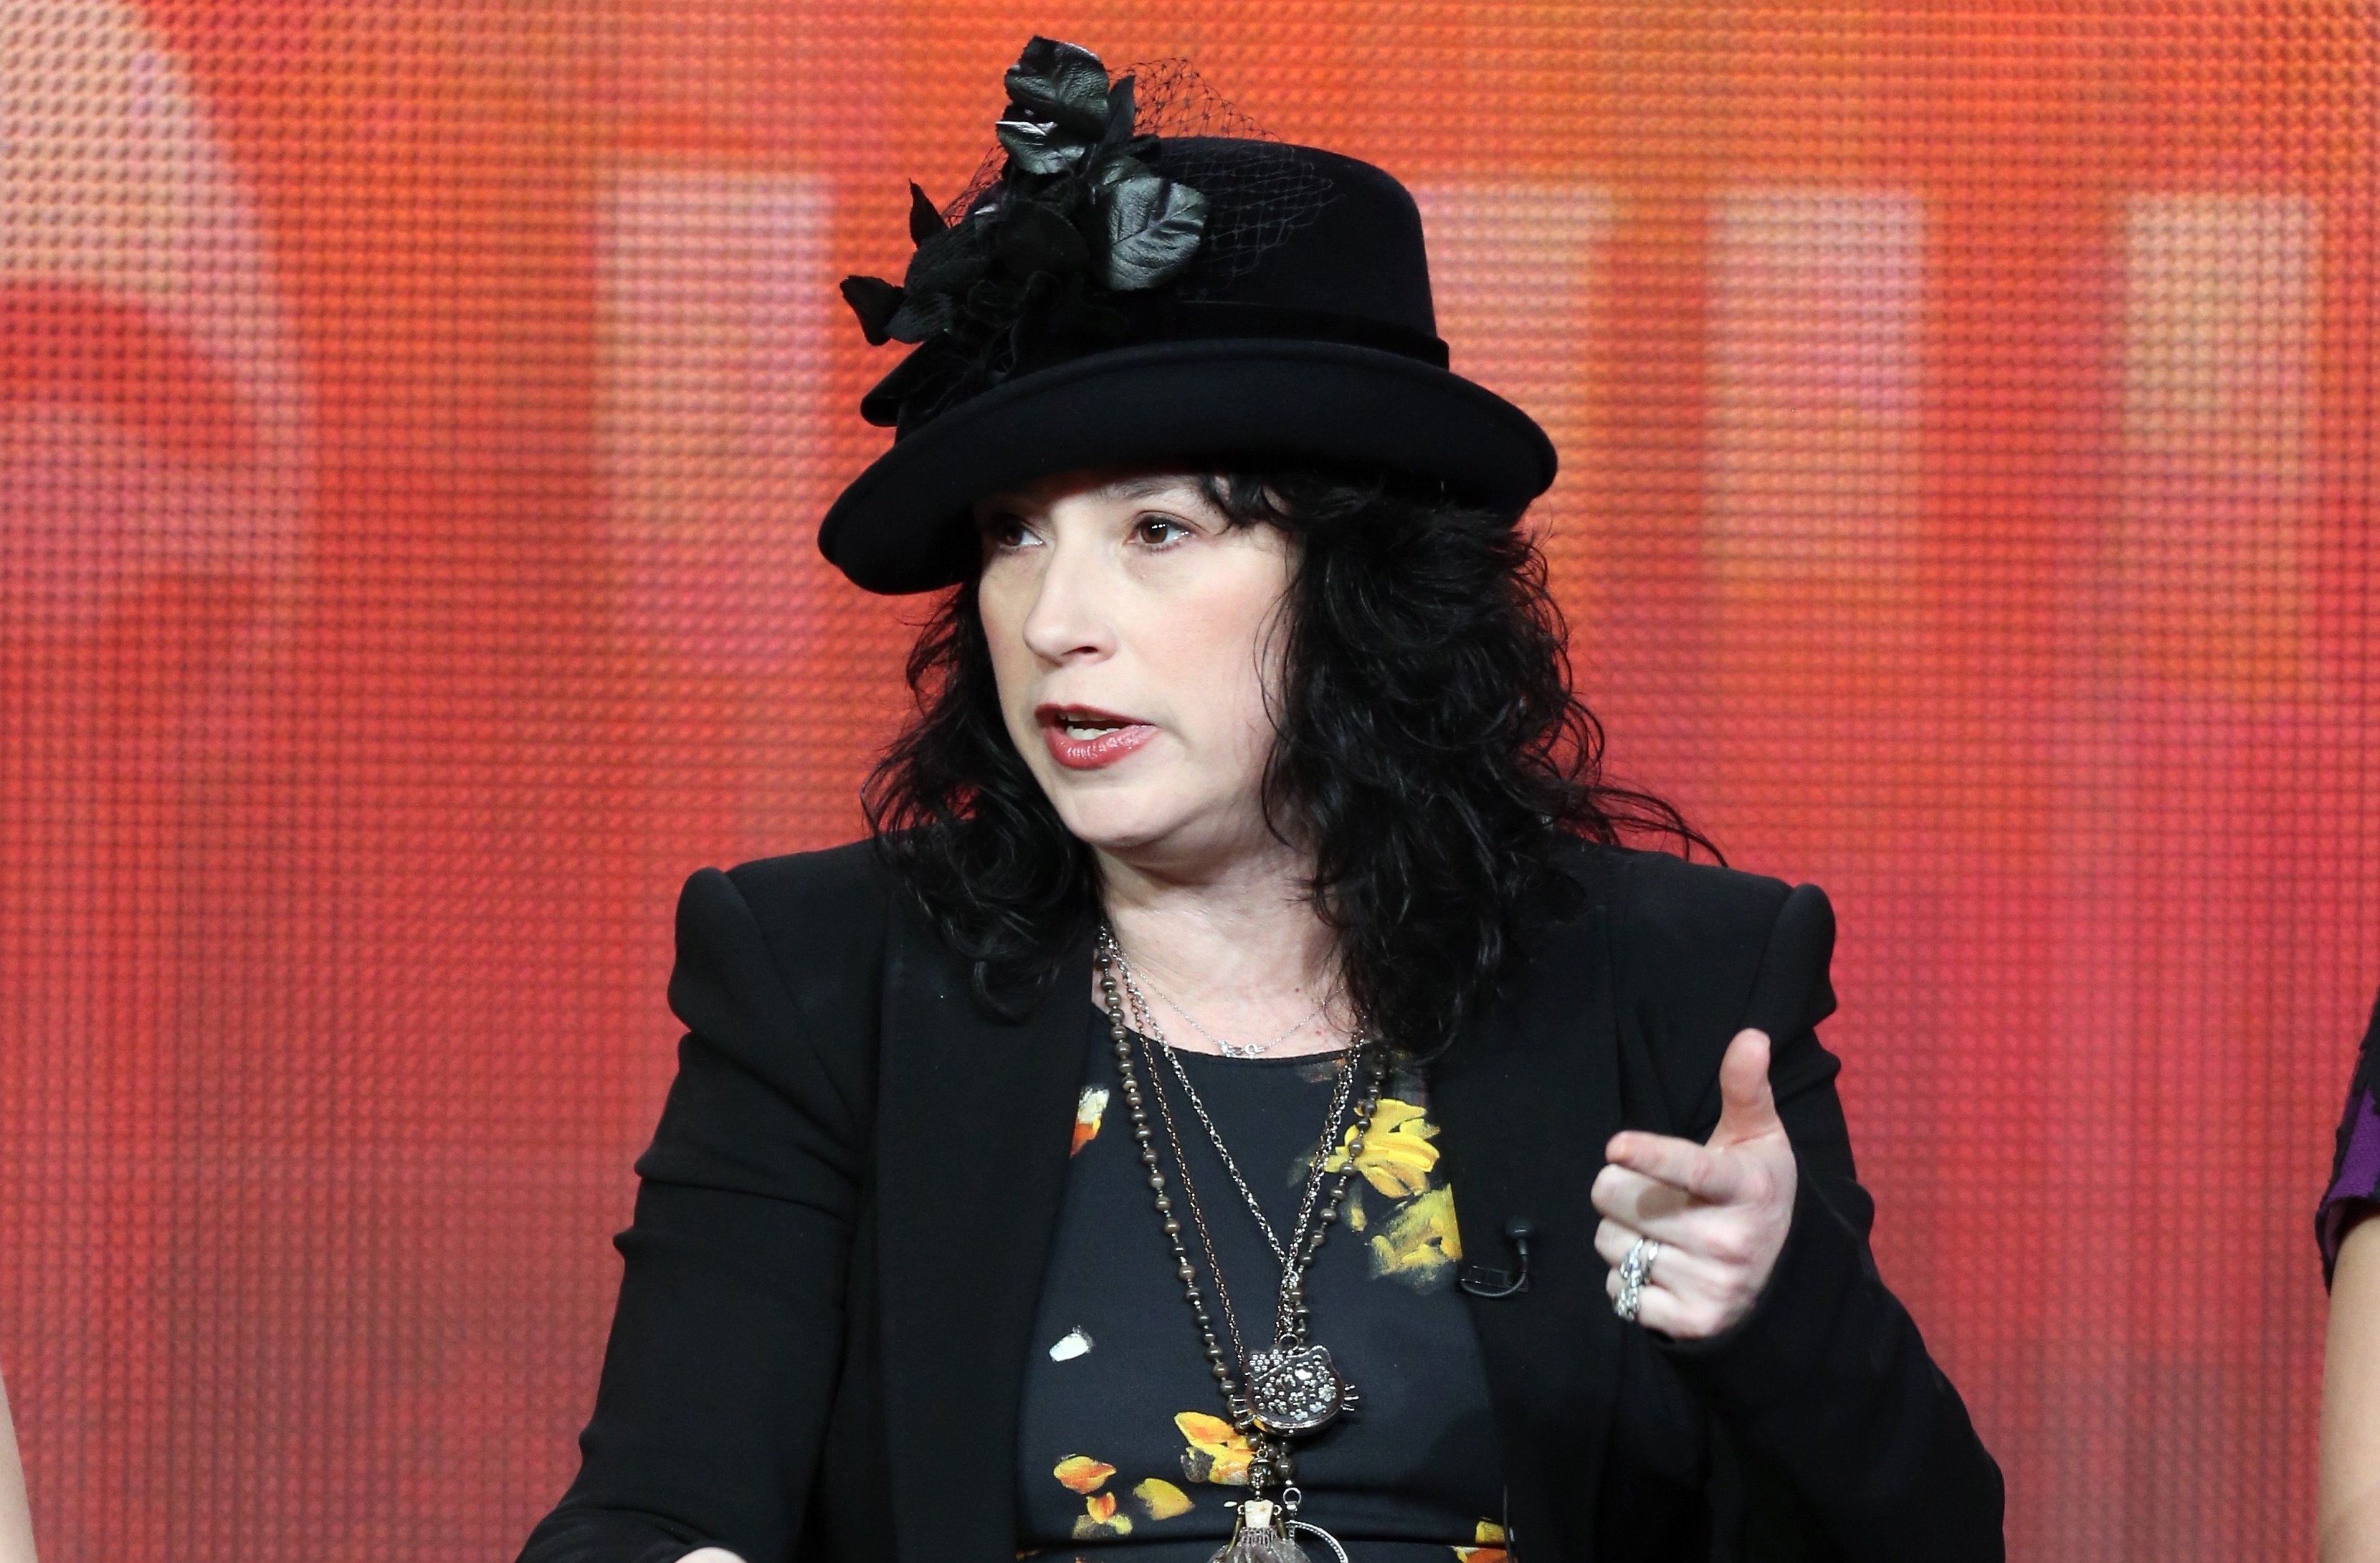 Who Is Amy Sherman-Palladino? Everything We Know About ‘The Marvelous Mrs. Maisel’ Writer